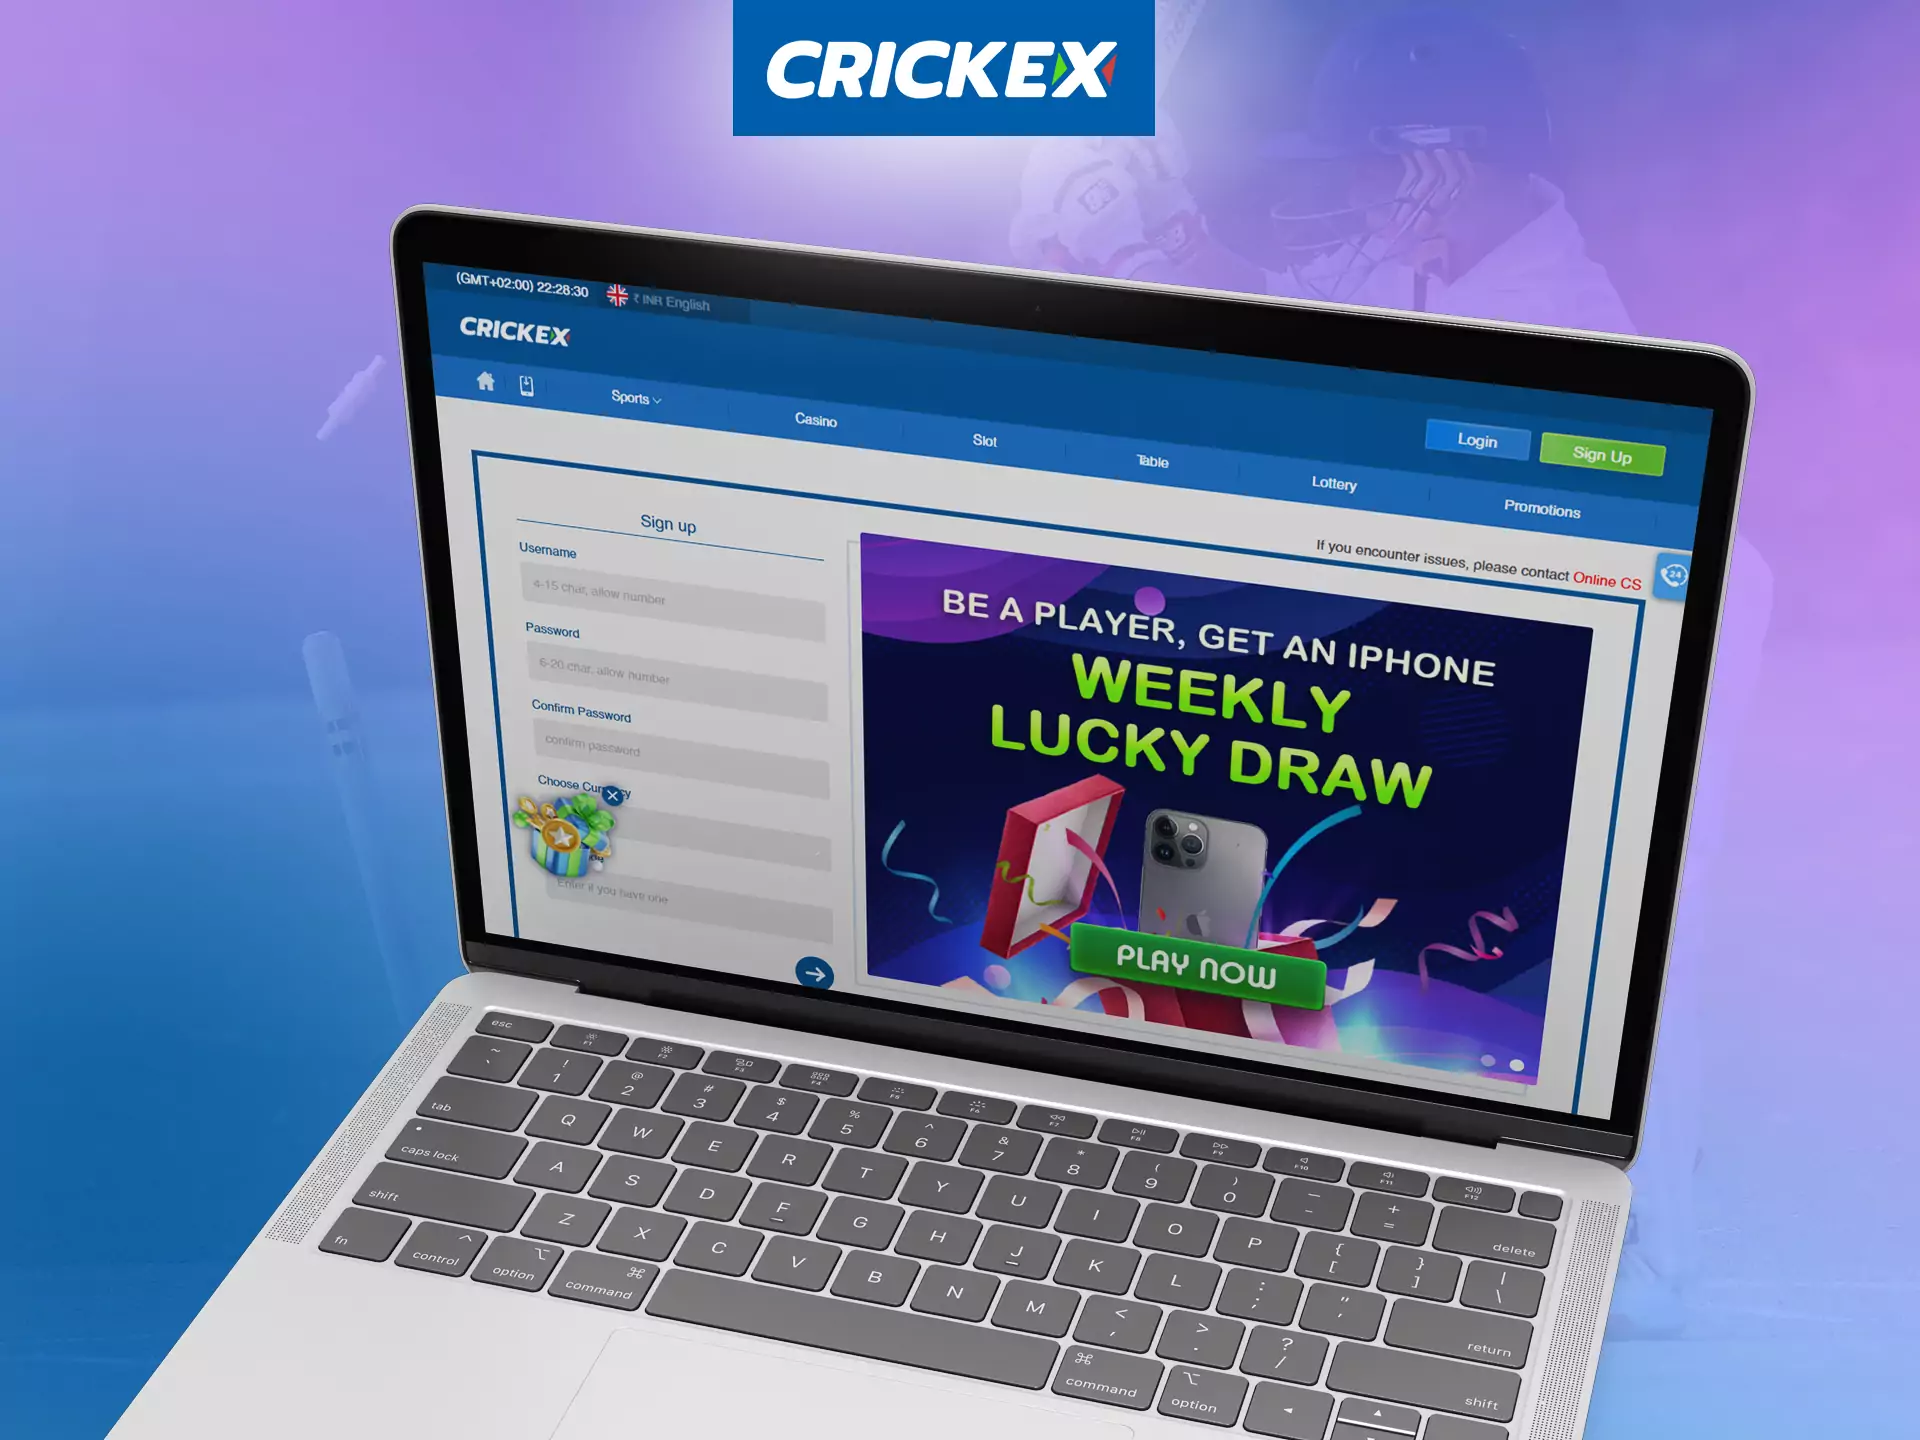 Go through a simple registration on Crickex and create your betting account.